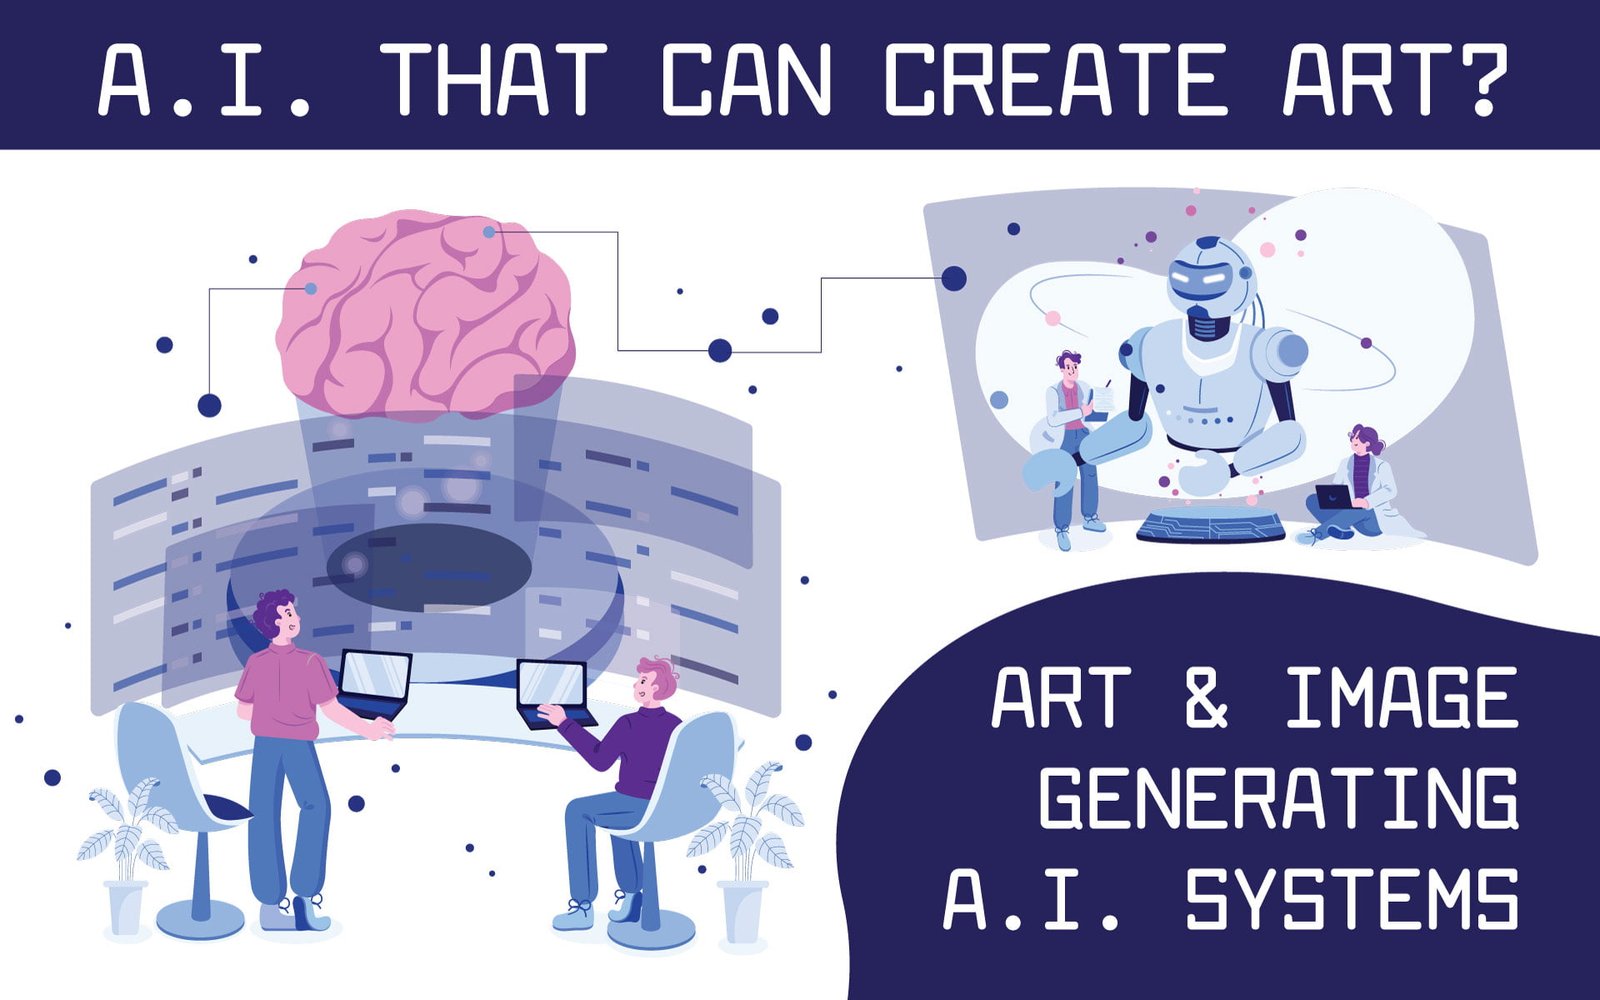 Art & Image Generating A.I. Systems